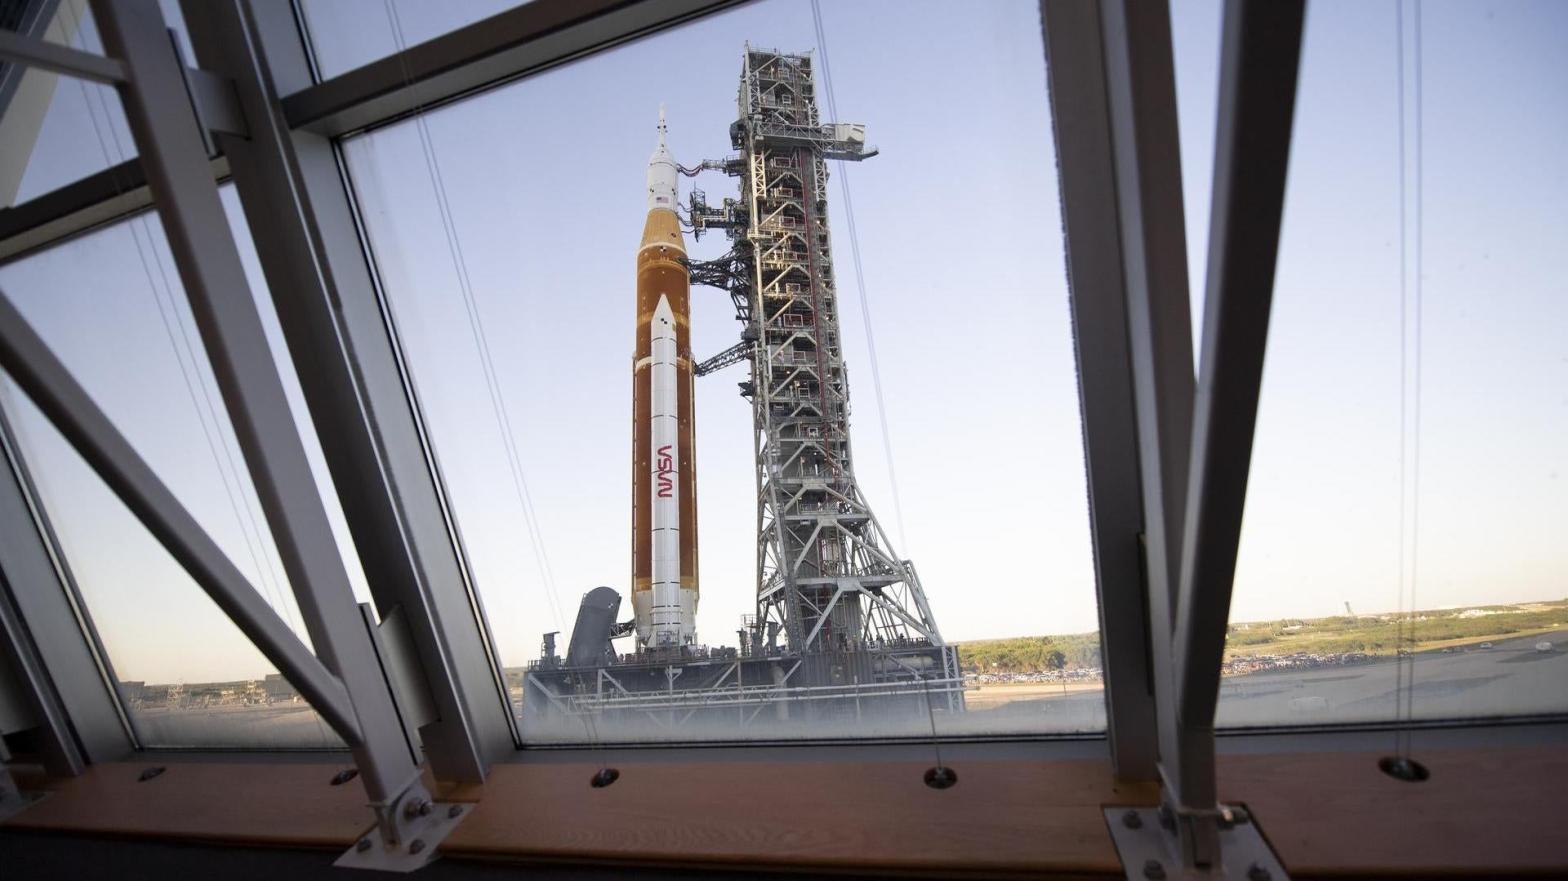 NASA's SLS rocket as seen through the windows of Firing Room One in the Rocco A. Petrone Launch Control Centre at Kennedy Space Centre, Florida.  (Photo: NASA/Joel Kowsky)